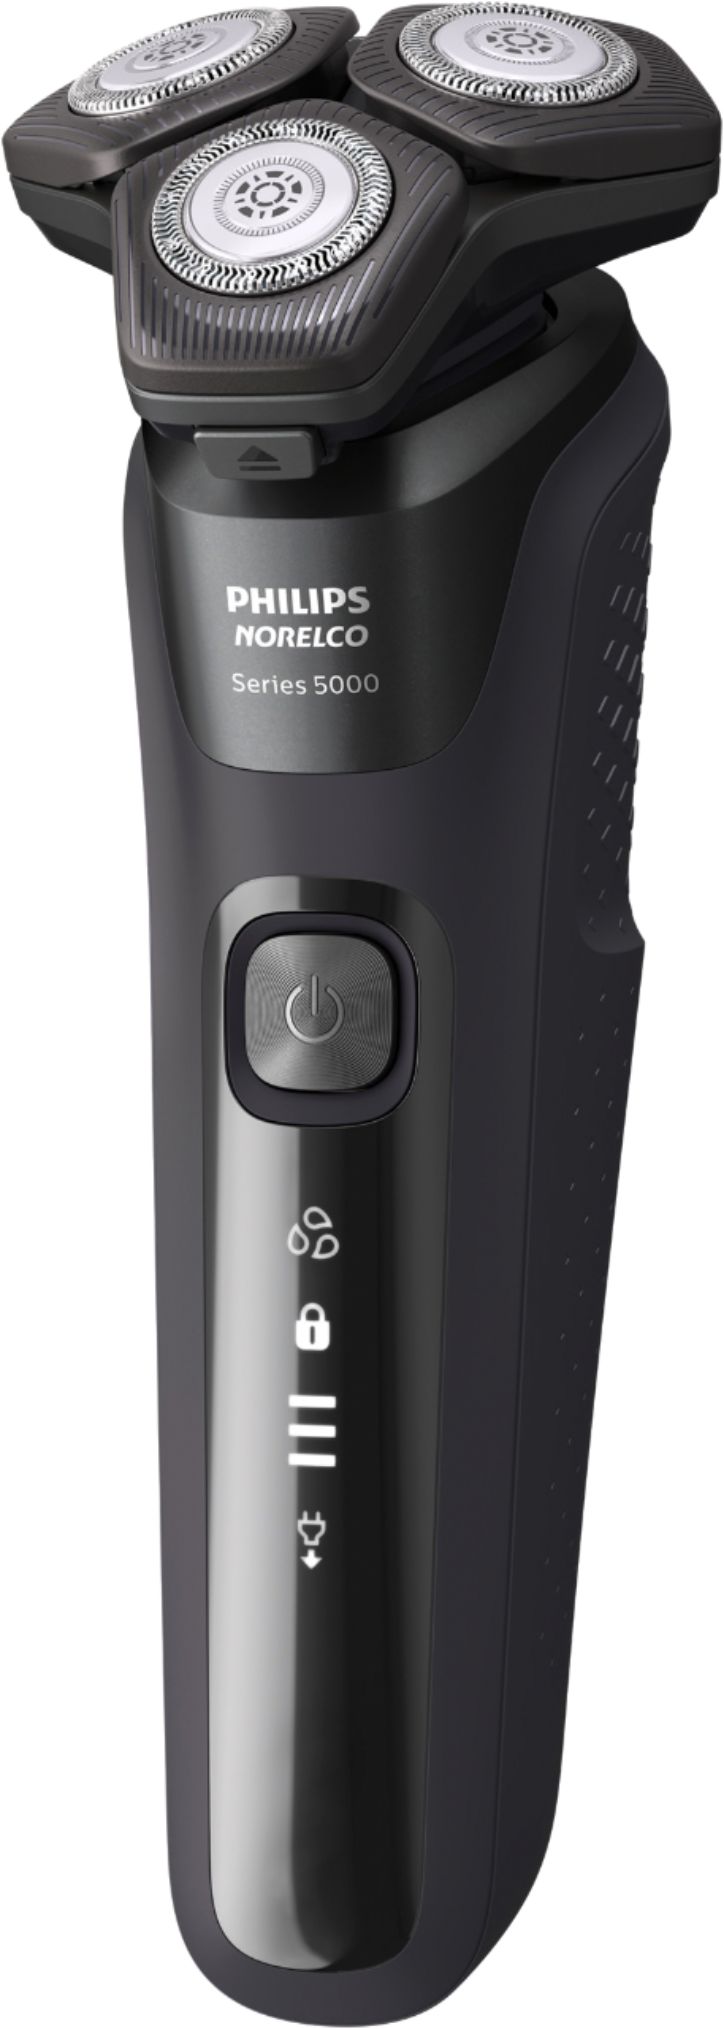 Left View: Philips Norelco - Shaver 5300, Rechargeable Wet & Dry Shaver with Pop-Up Trimmer - Deep Black